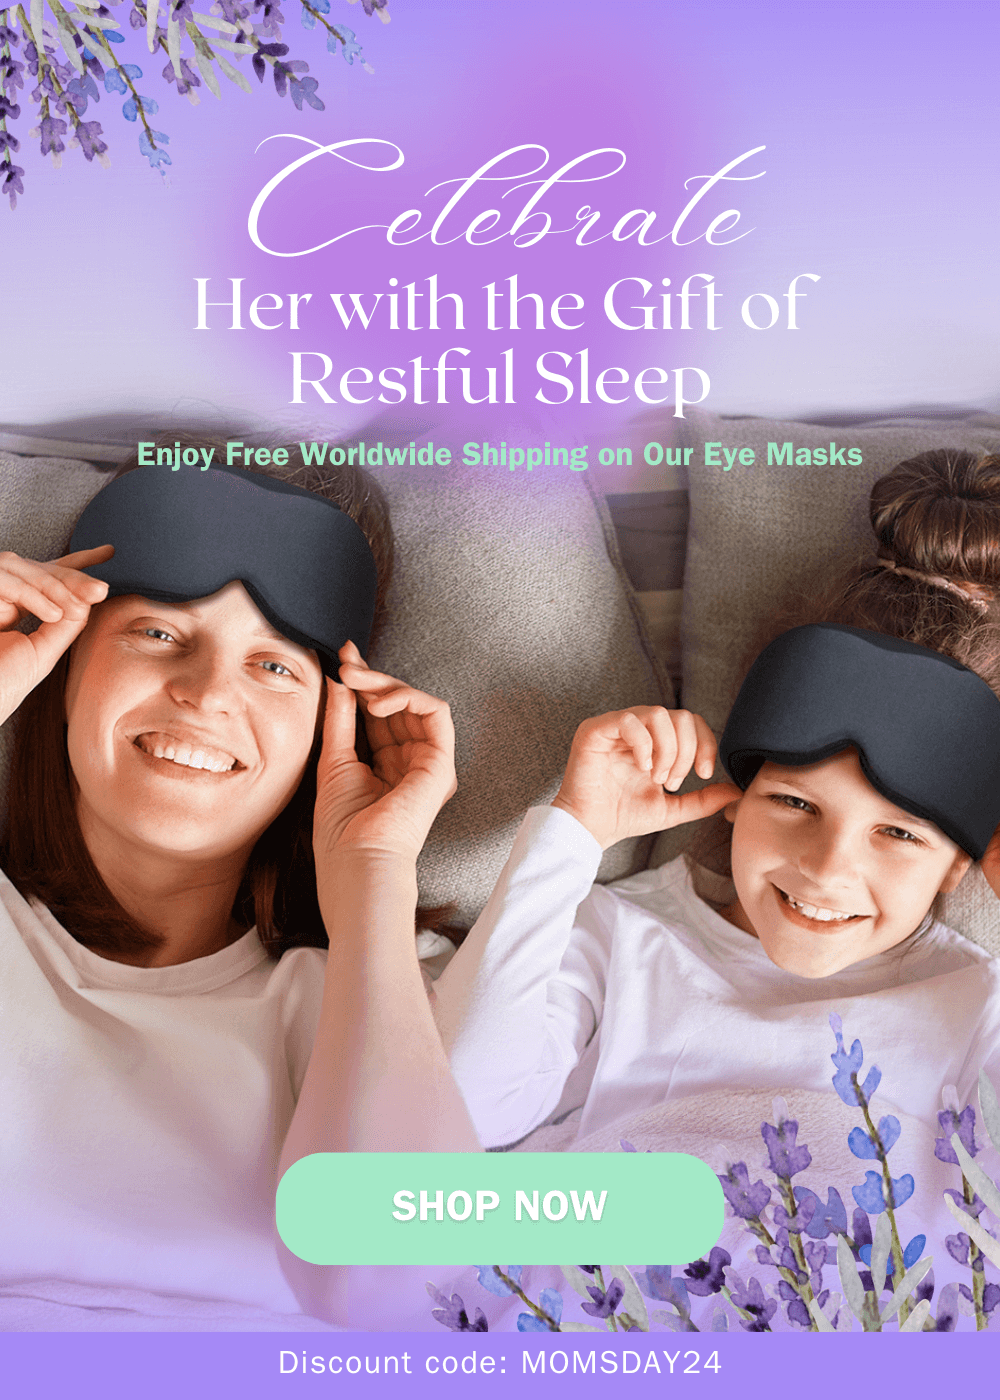 Mother's Day Promotion: Free Shipping discount code MOMSDAY24